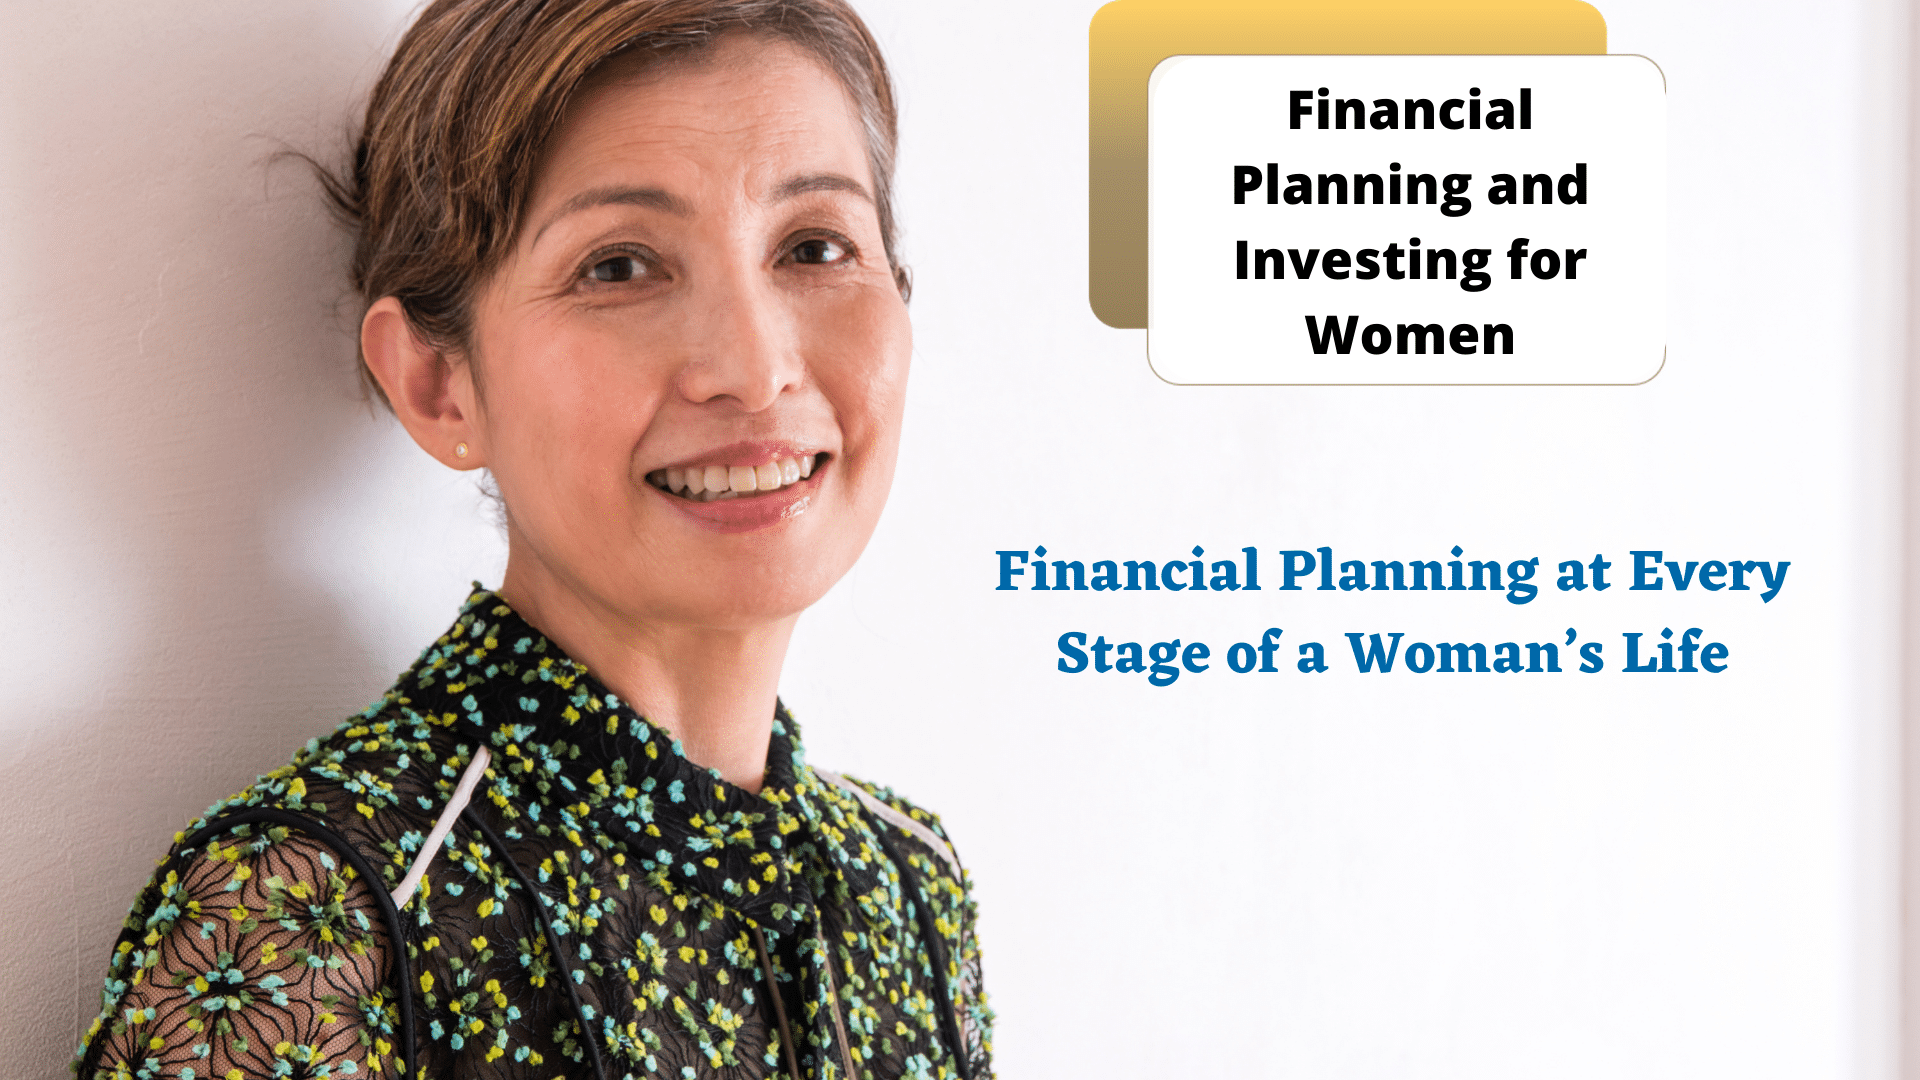 Financial Planning for every stage of a woman's life